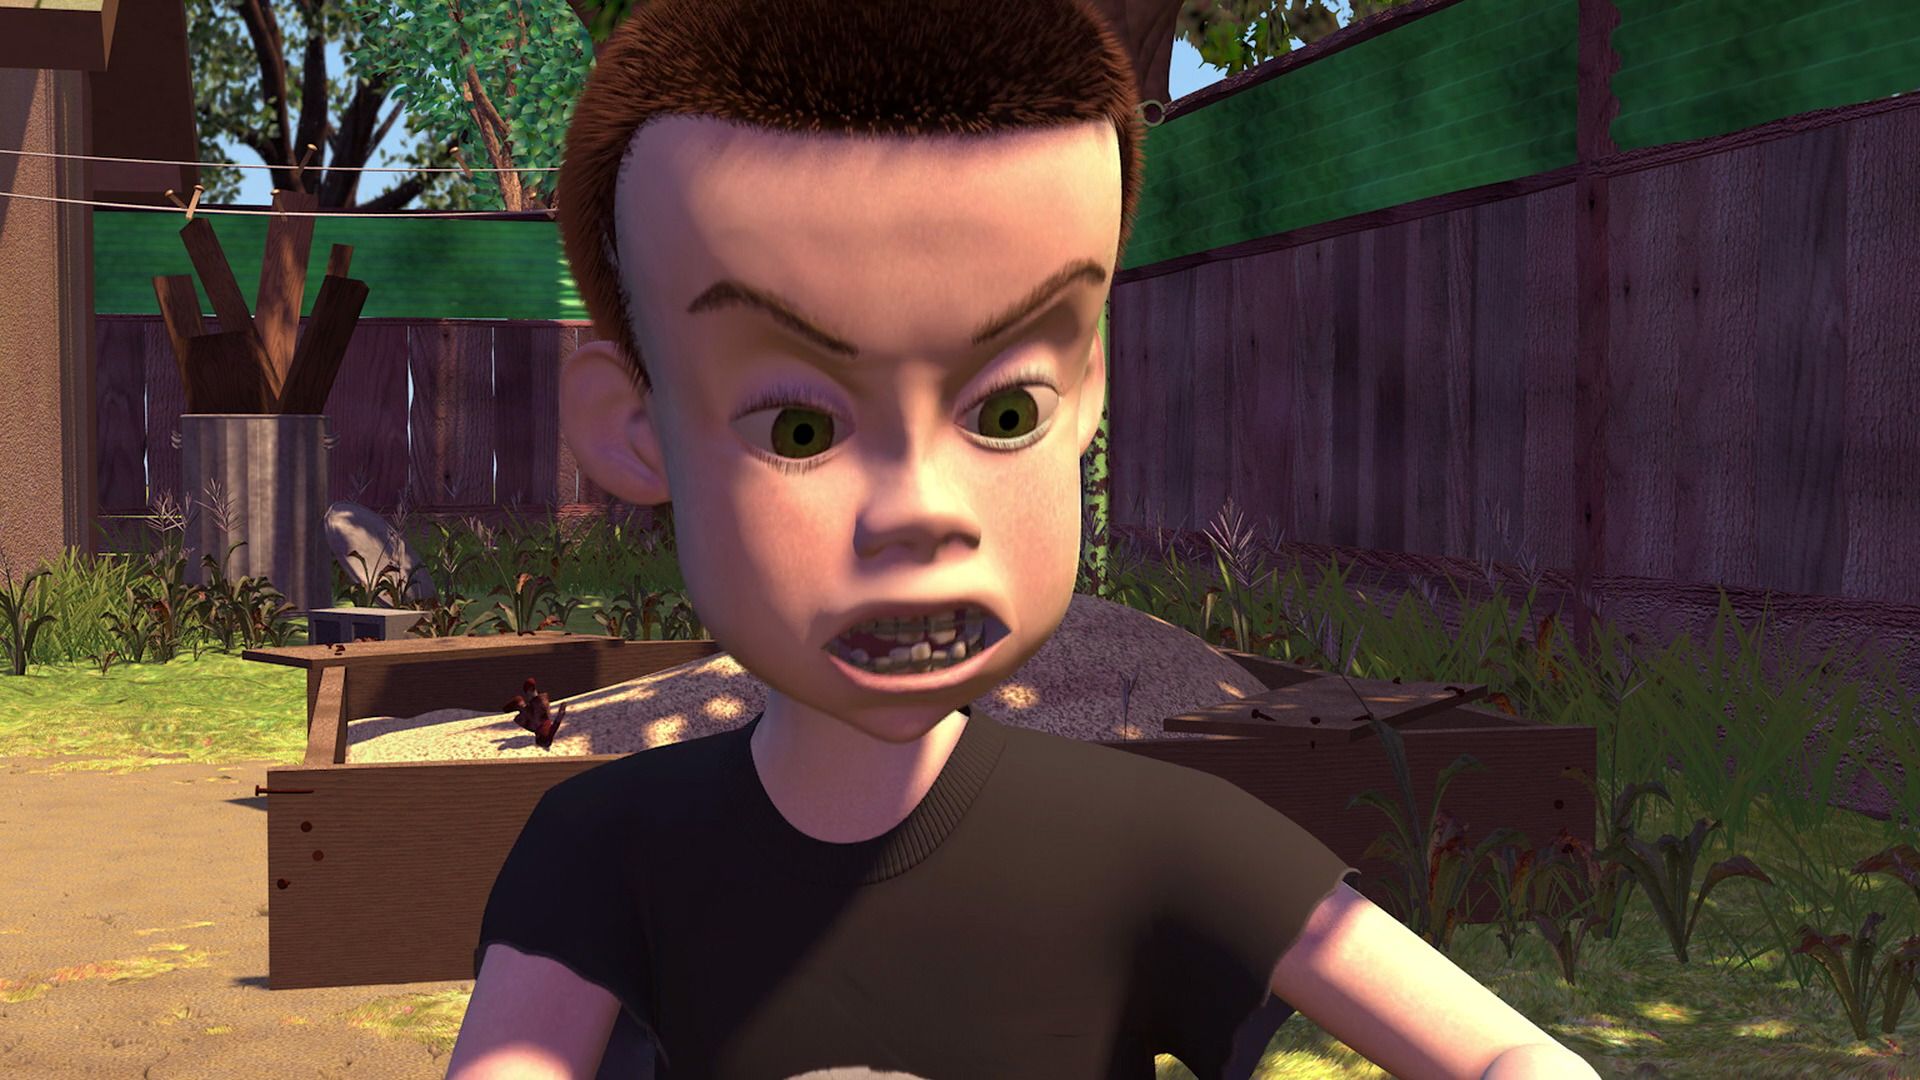 kid from toy story 1